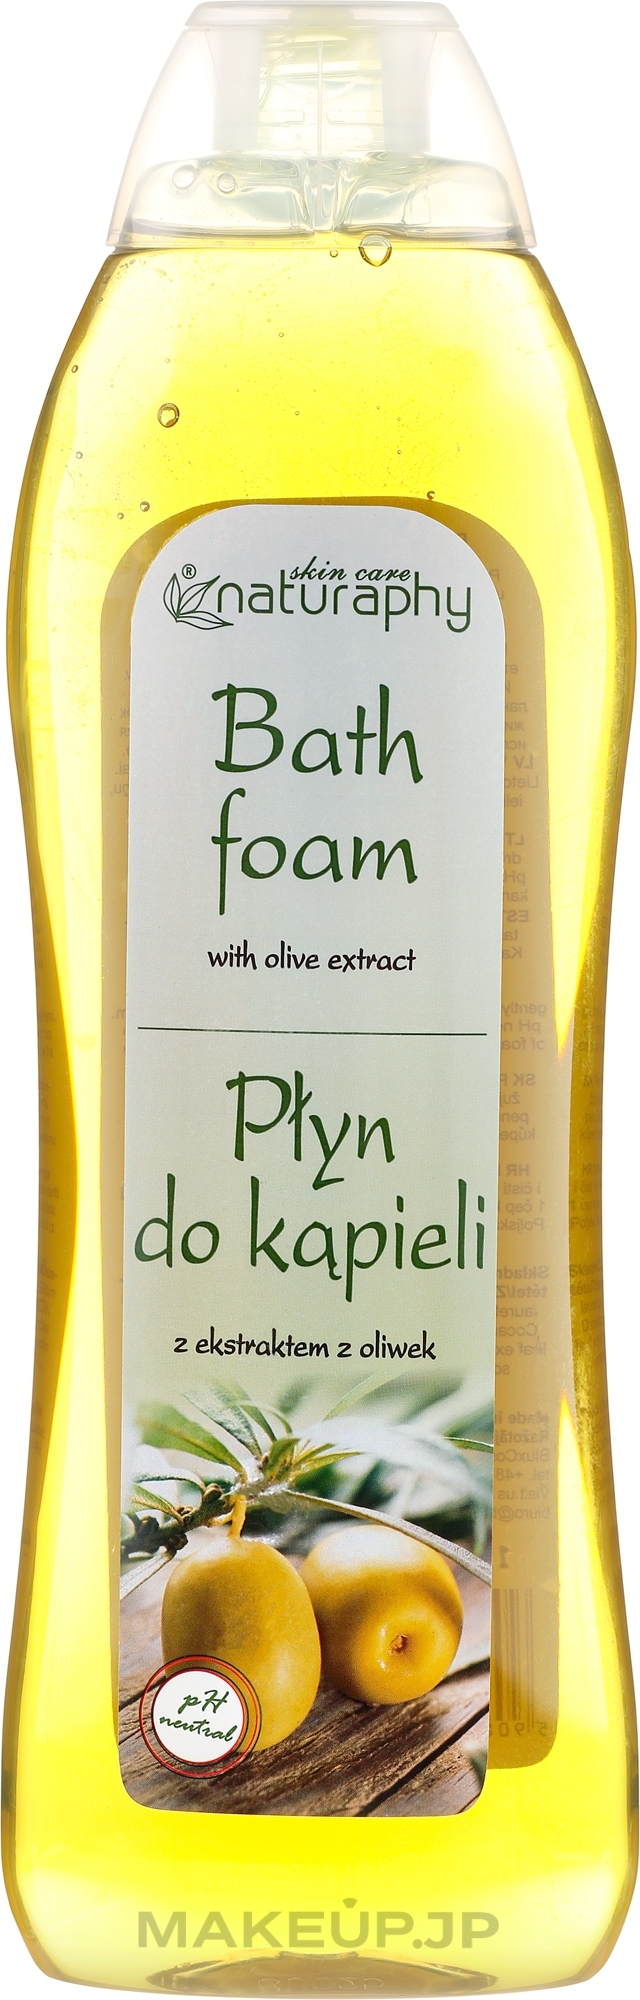 Bubble Bath with Olive Extract - Naturaphy Bath Foam — photo 1000 ml